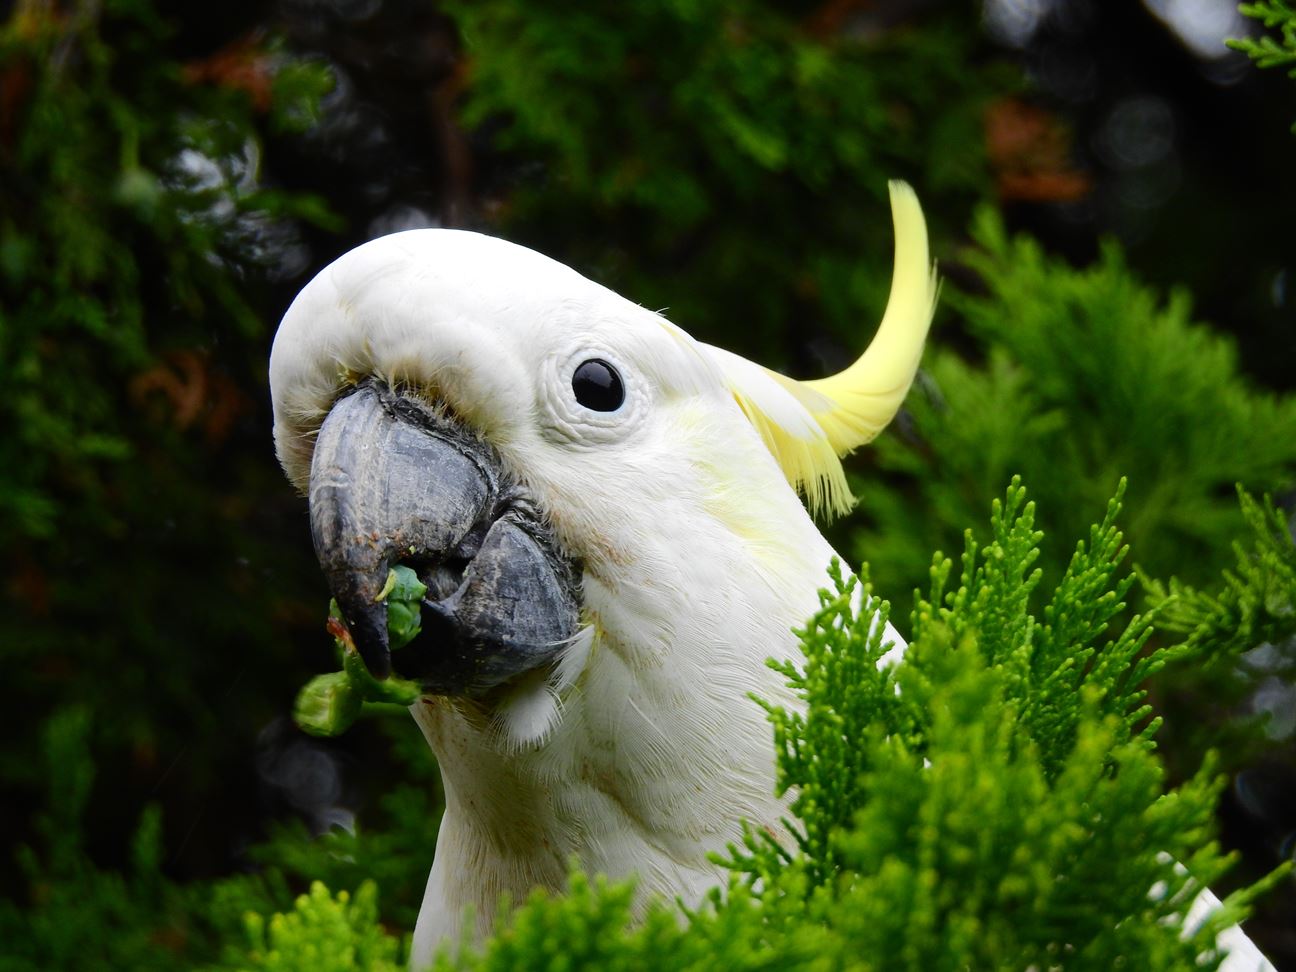 A cockatoo with food in its beak